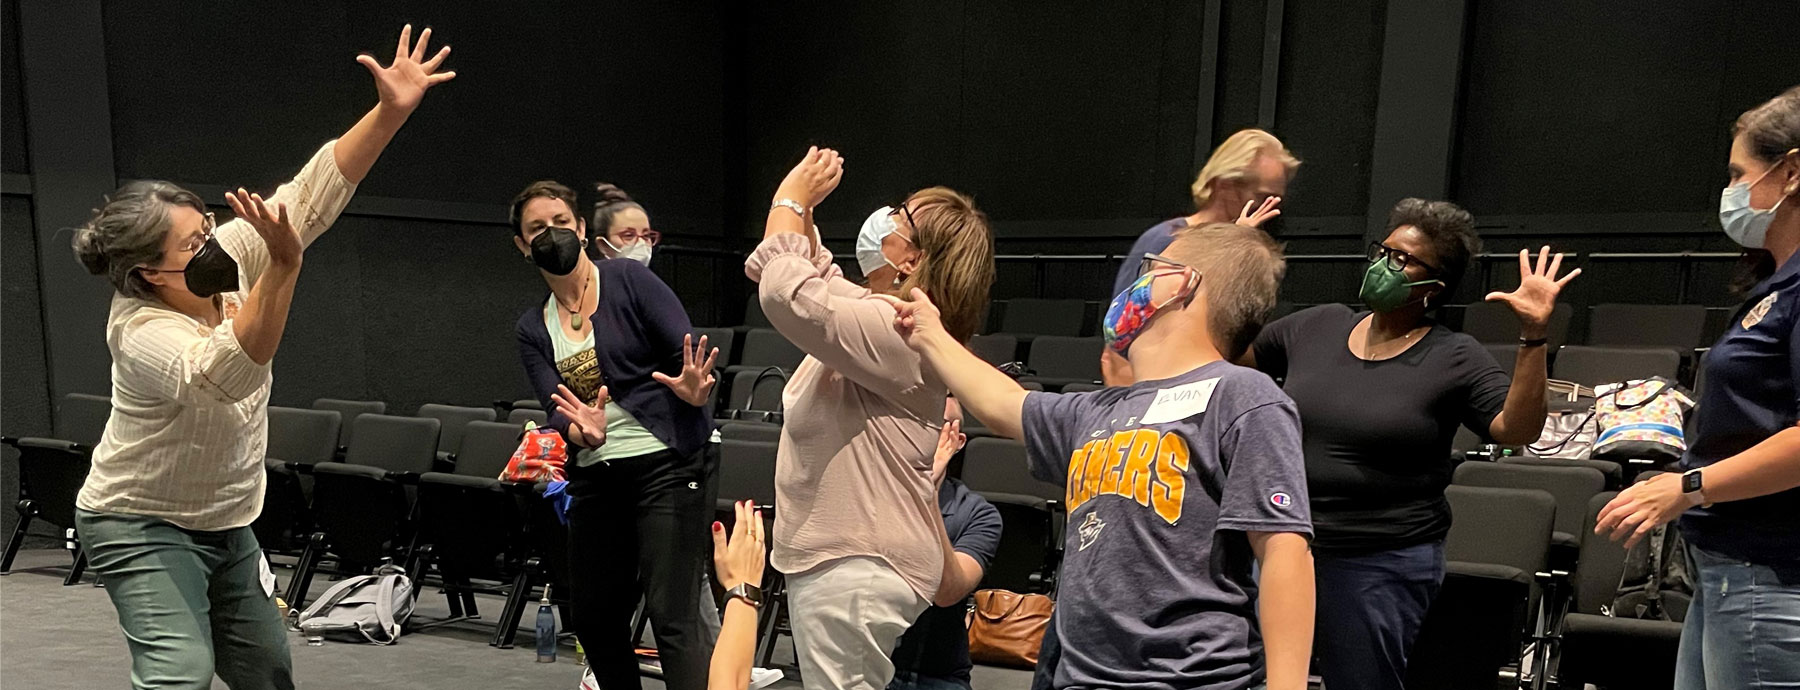 CHS Professors Bring Theatre to the Classroom to Address Healthcare Disparities  